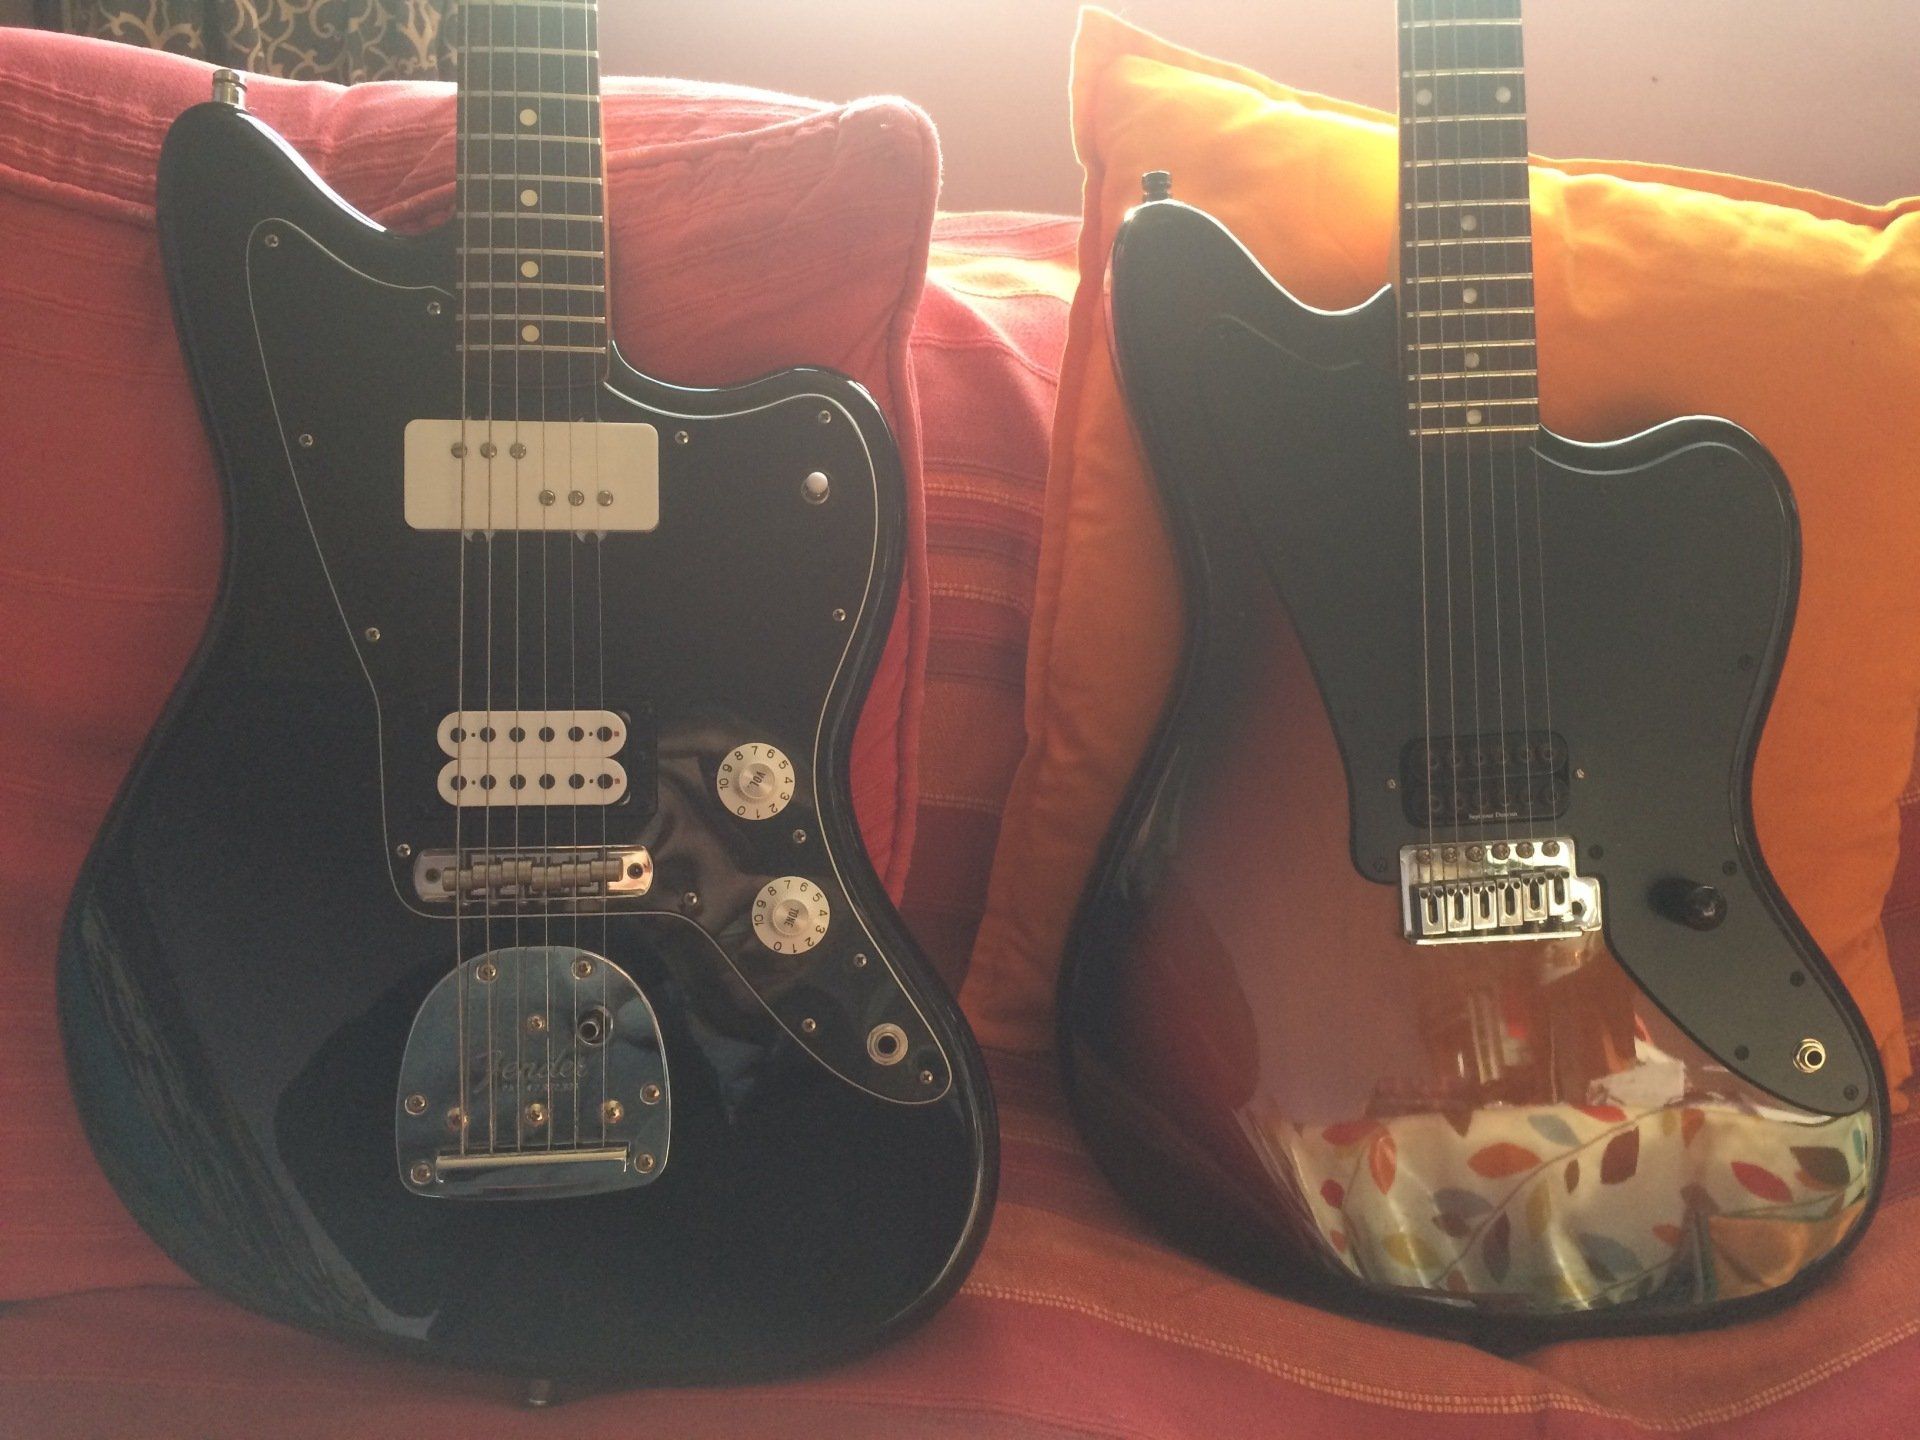 Jazzmasters with replaced pickups